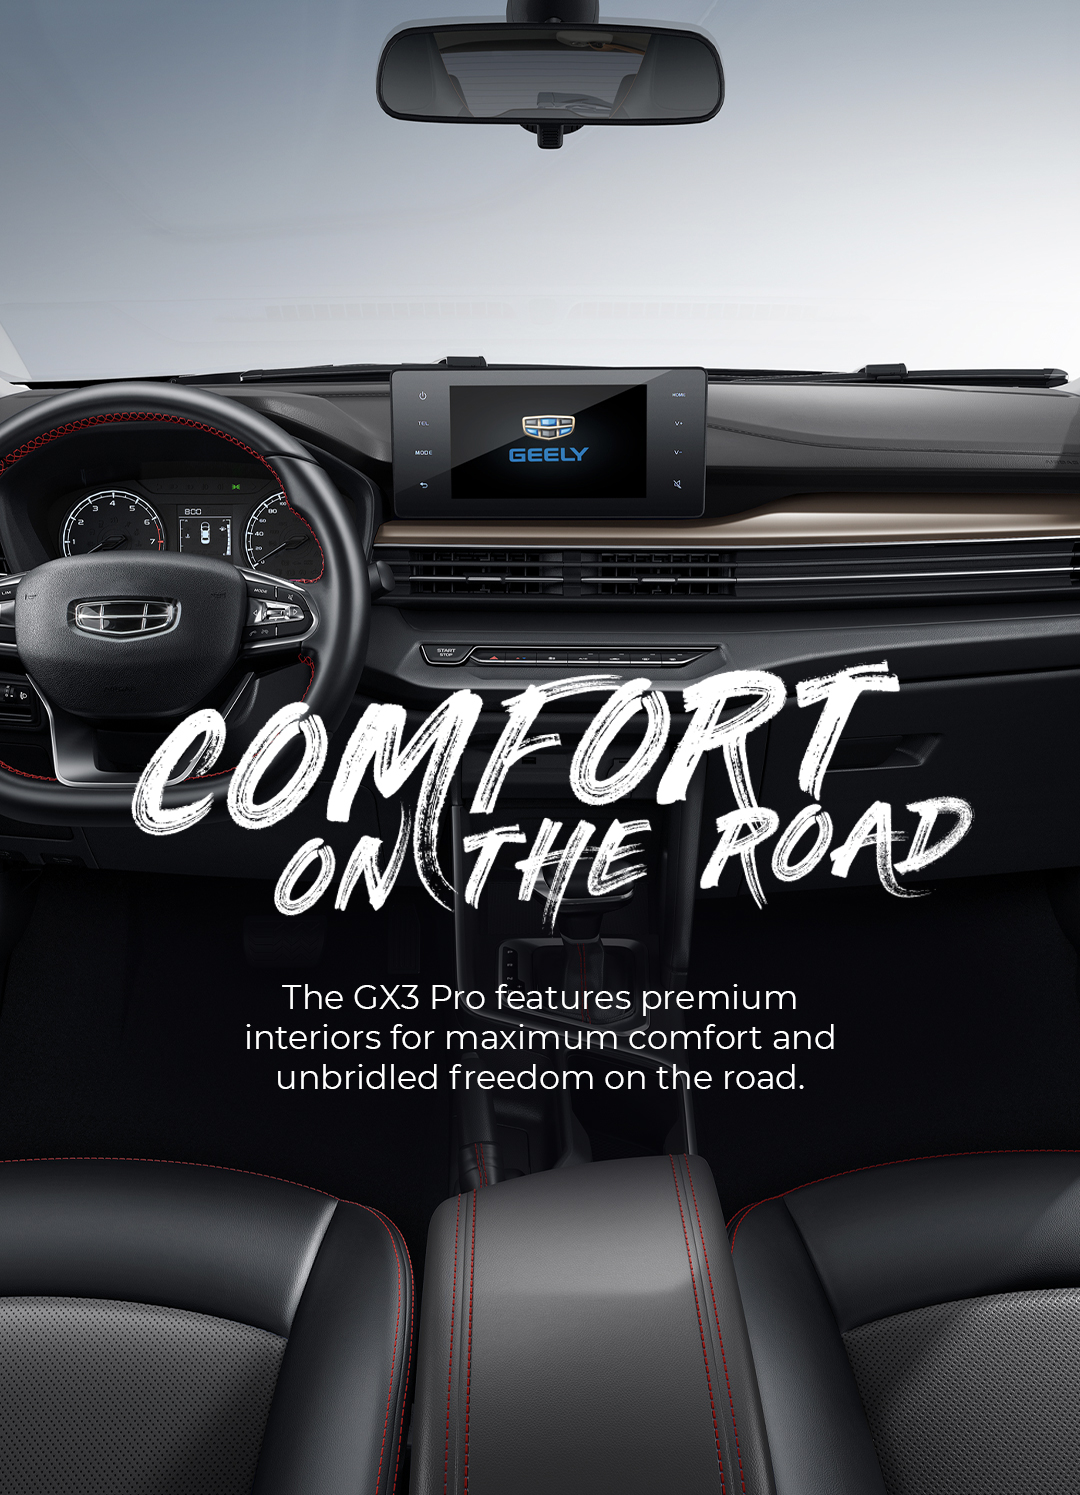 gx3 pro comfort on the road